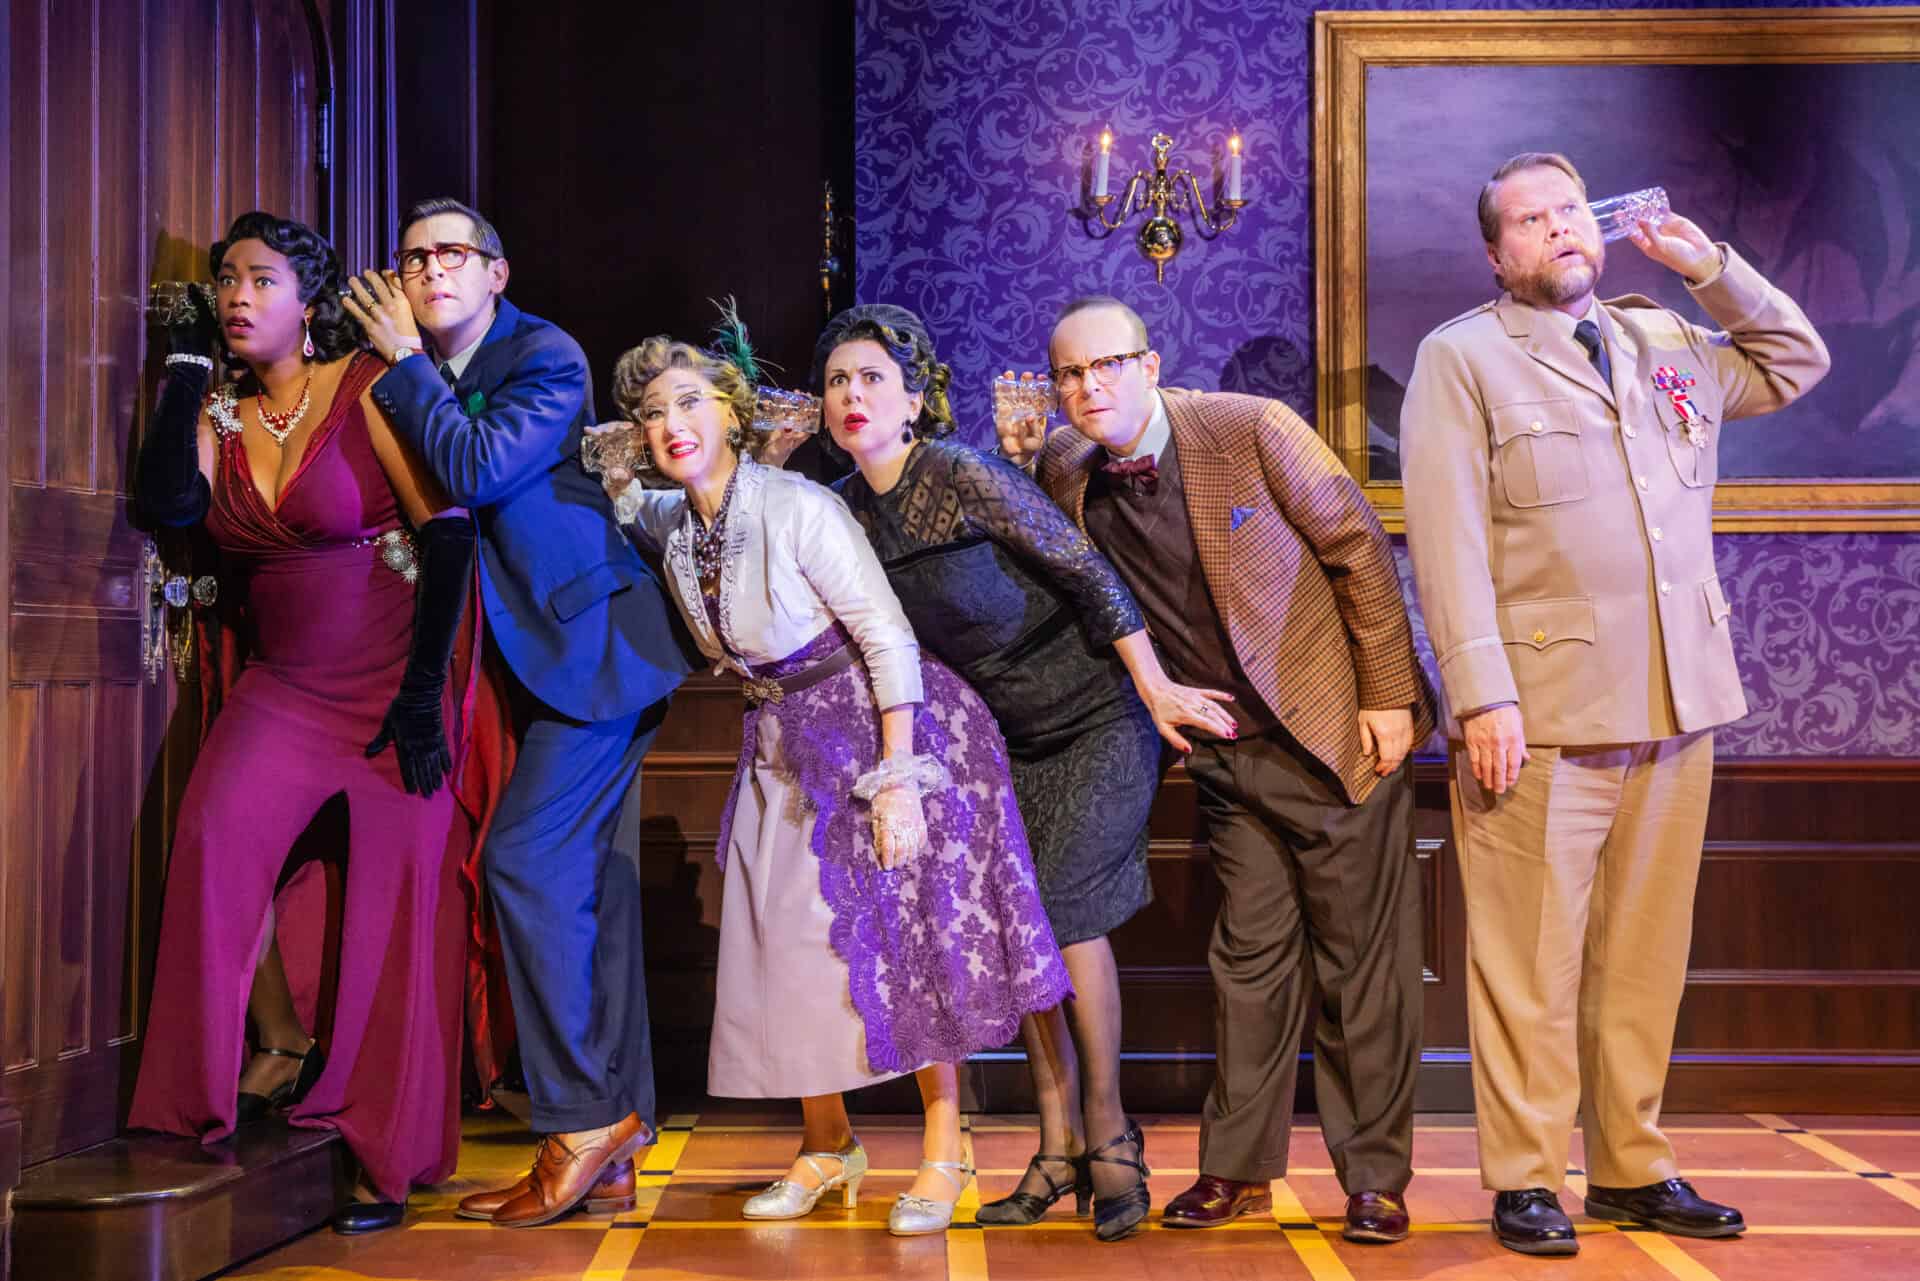 A scene from Clue where five main characters are lined up consecutively to the left of the stage, looking nervous while holding glasses to the back of the person in front of them. The sixth actor at the end of the line faces the right and hold his glass up to no one.